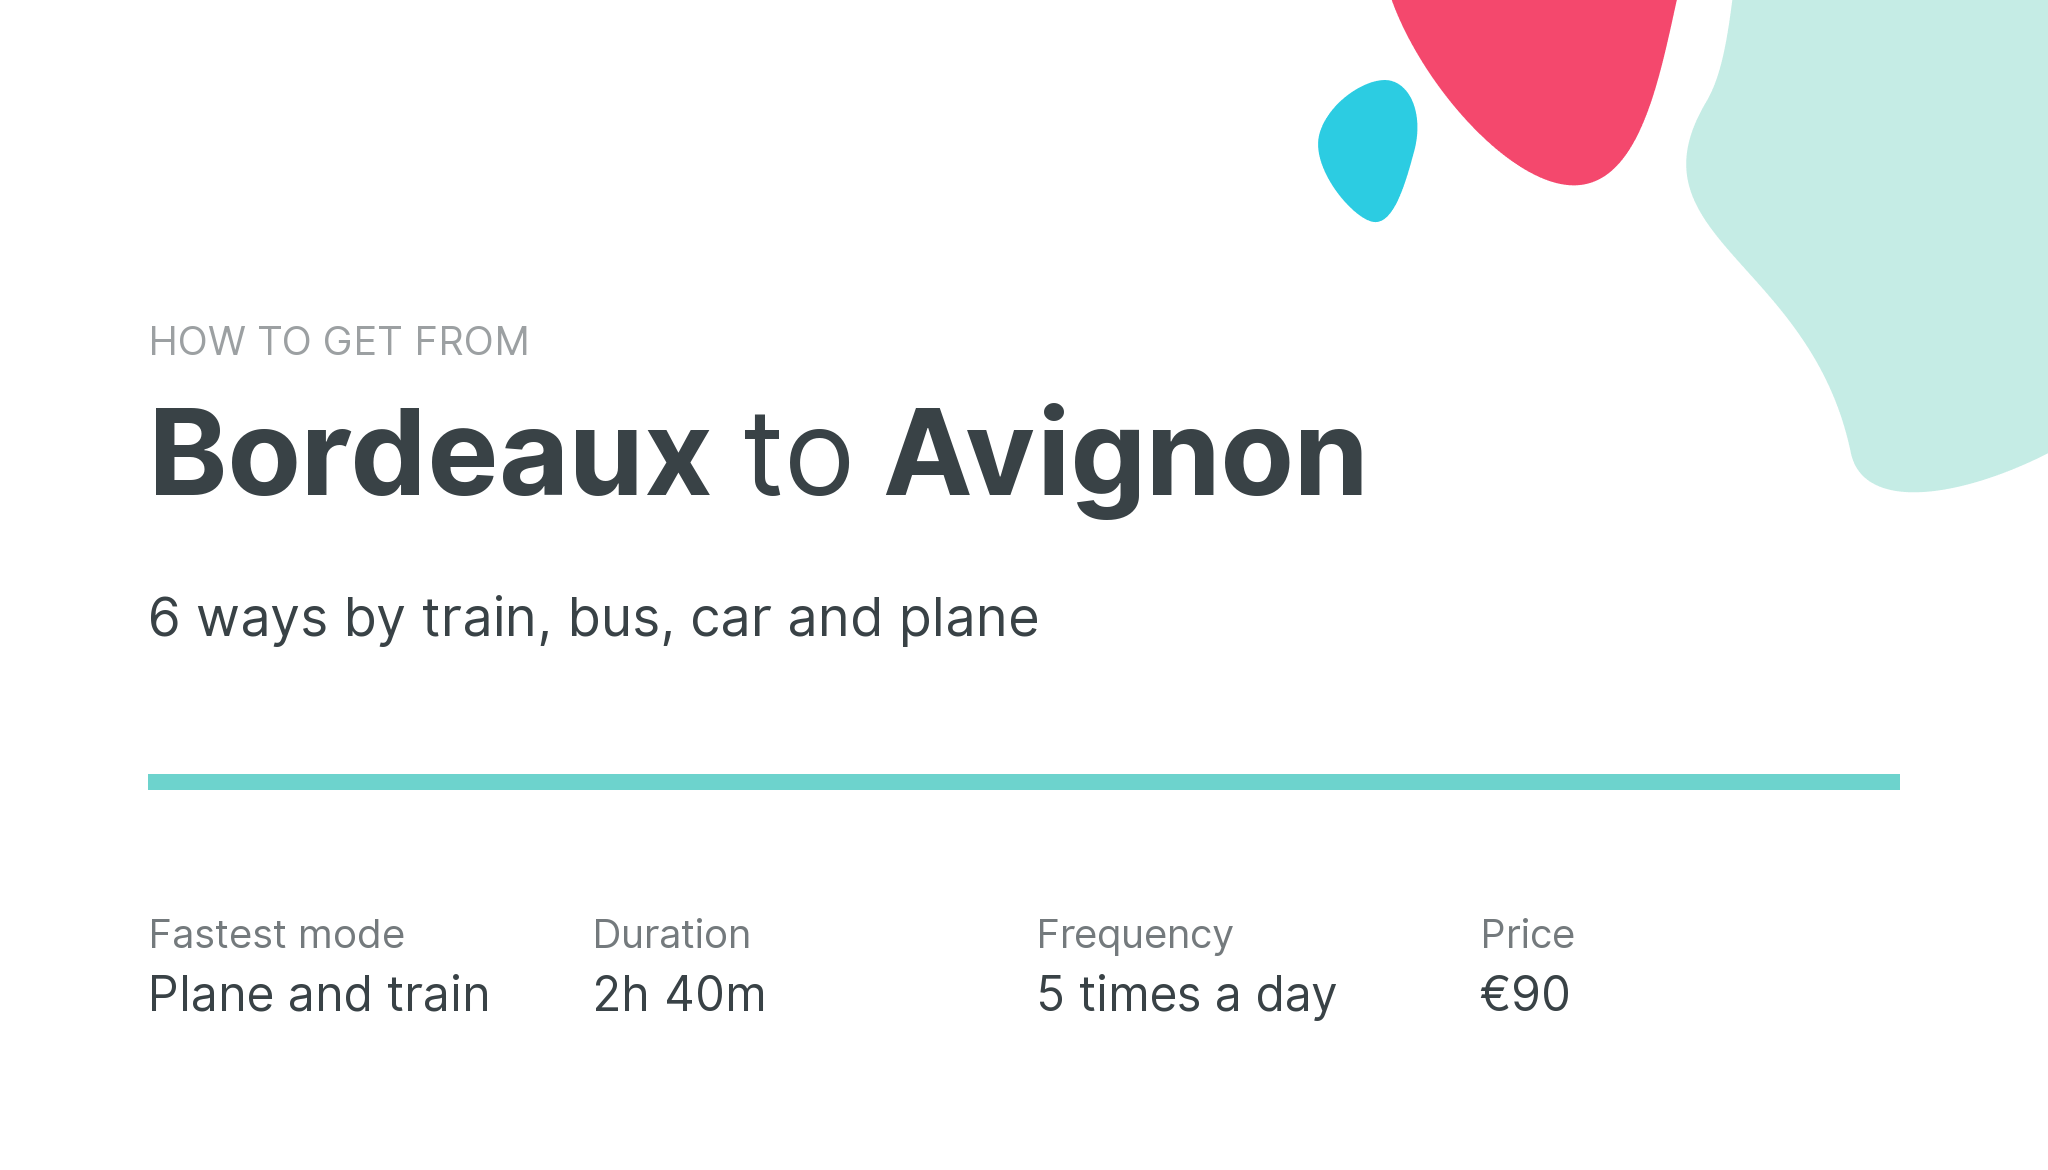 How do I get from Bordeaux to Avignon